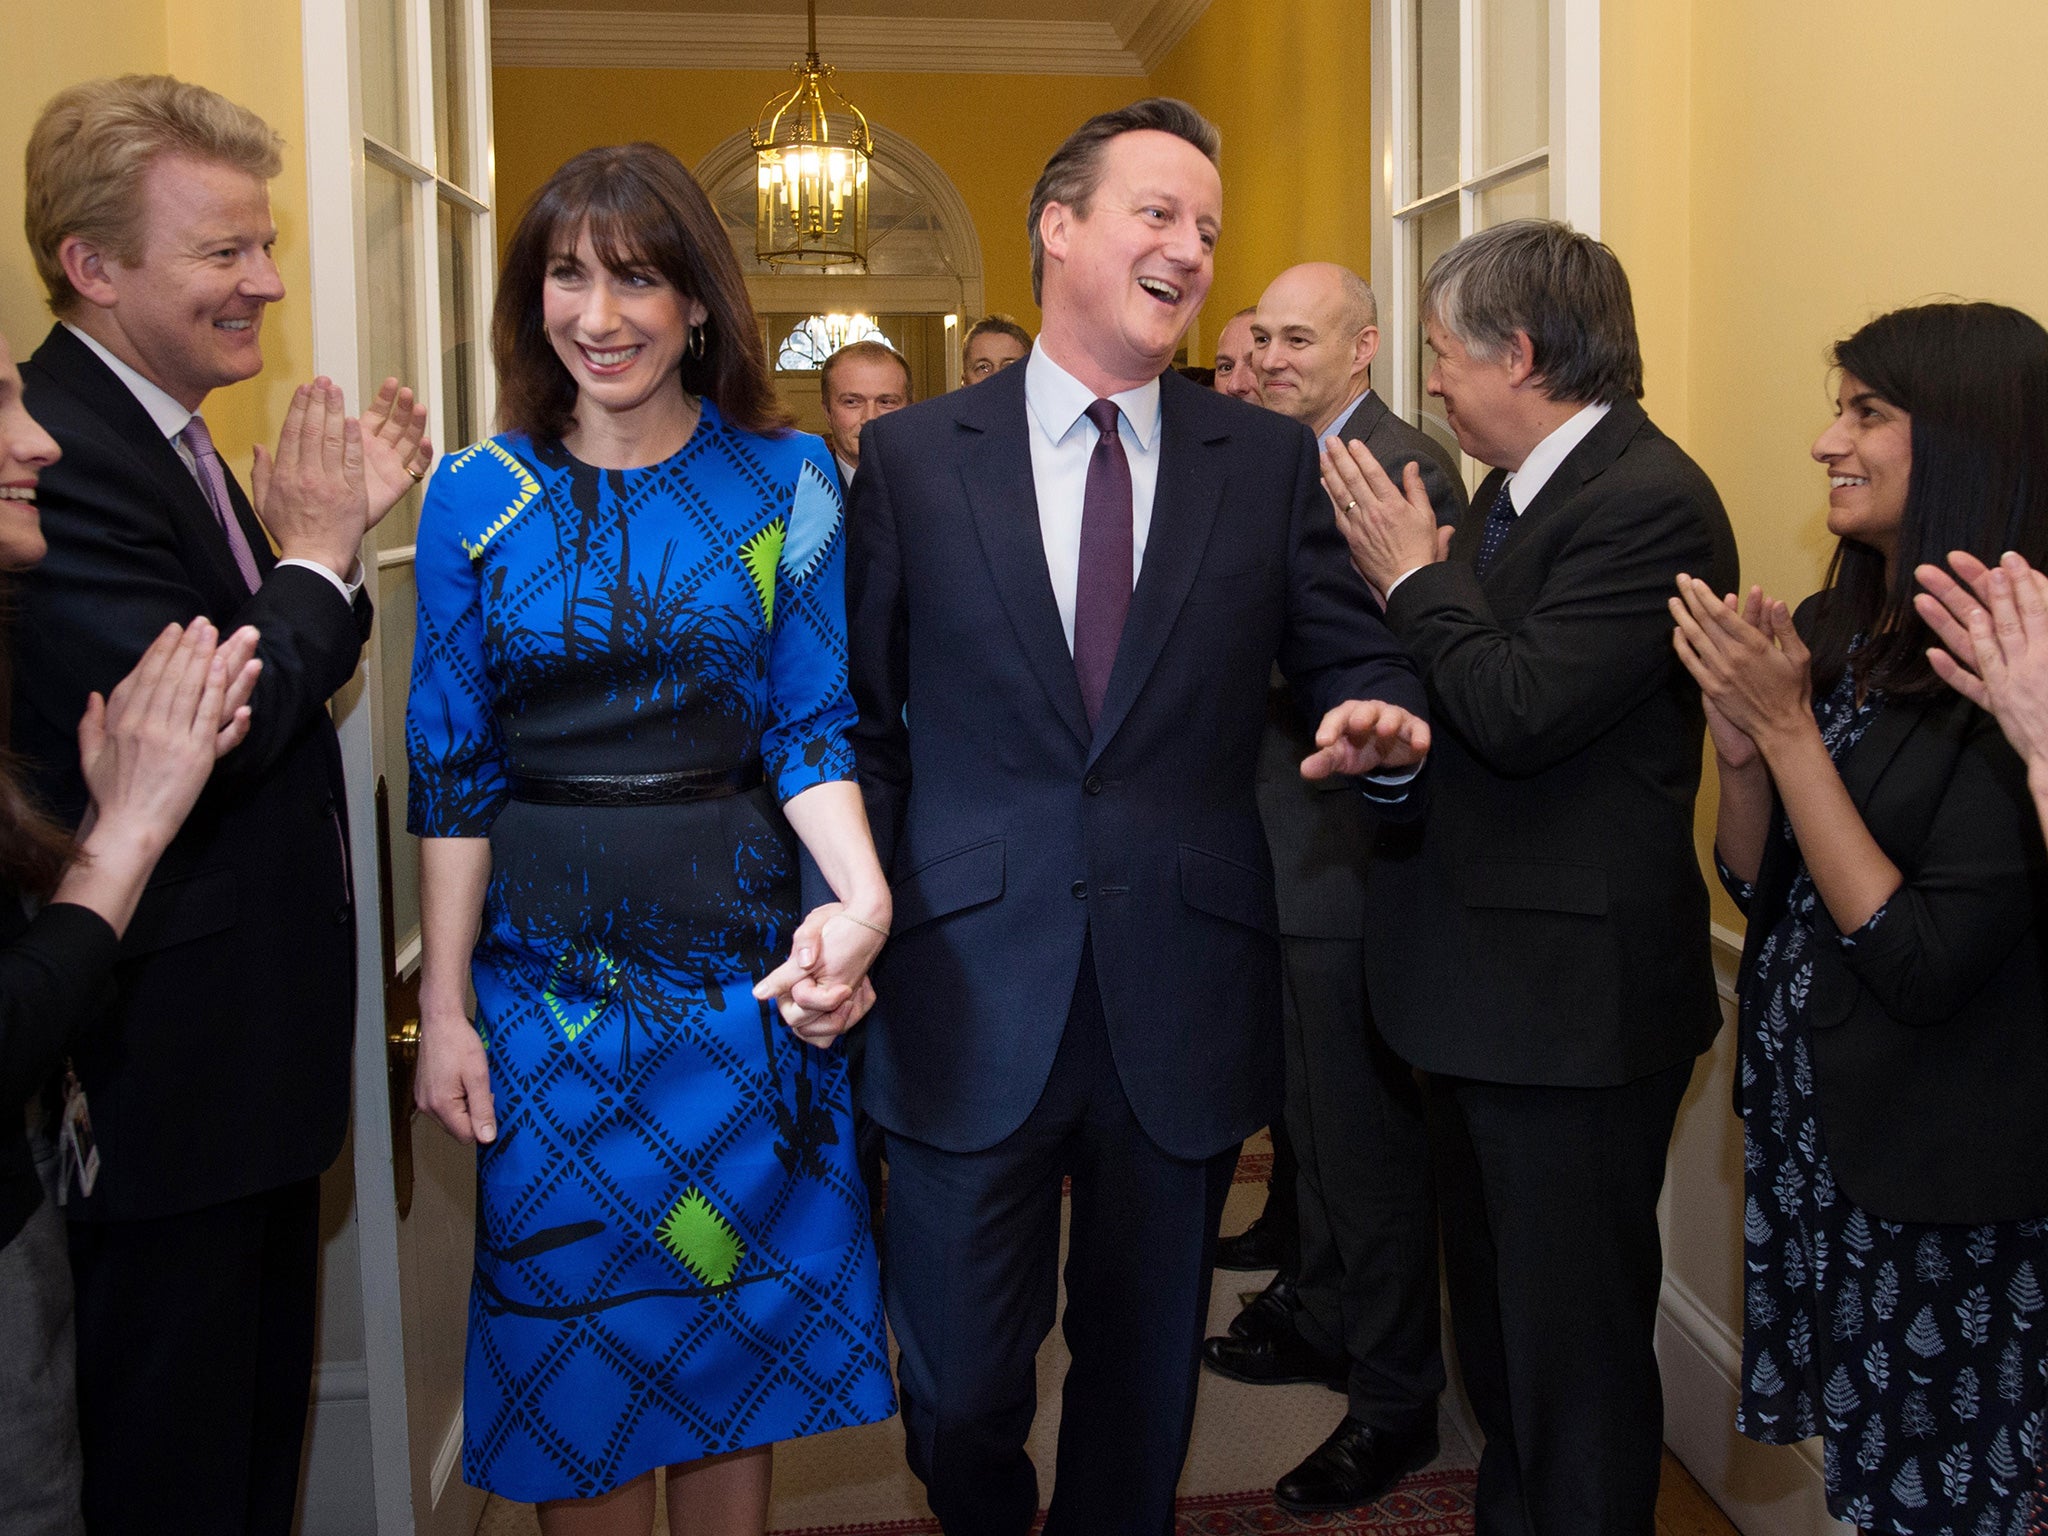 After Cameron's victory the top four Tory jobs in Government will all remain unchanged